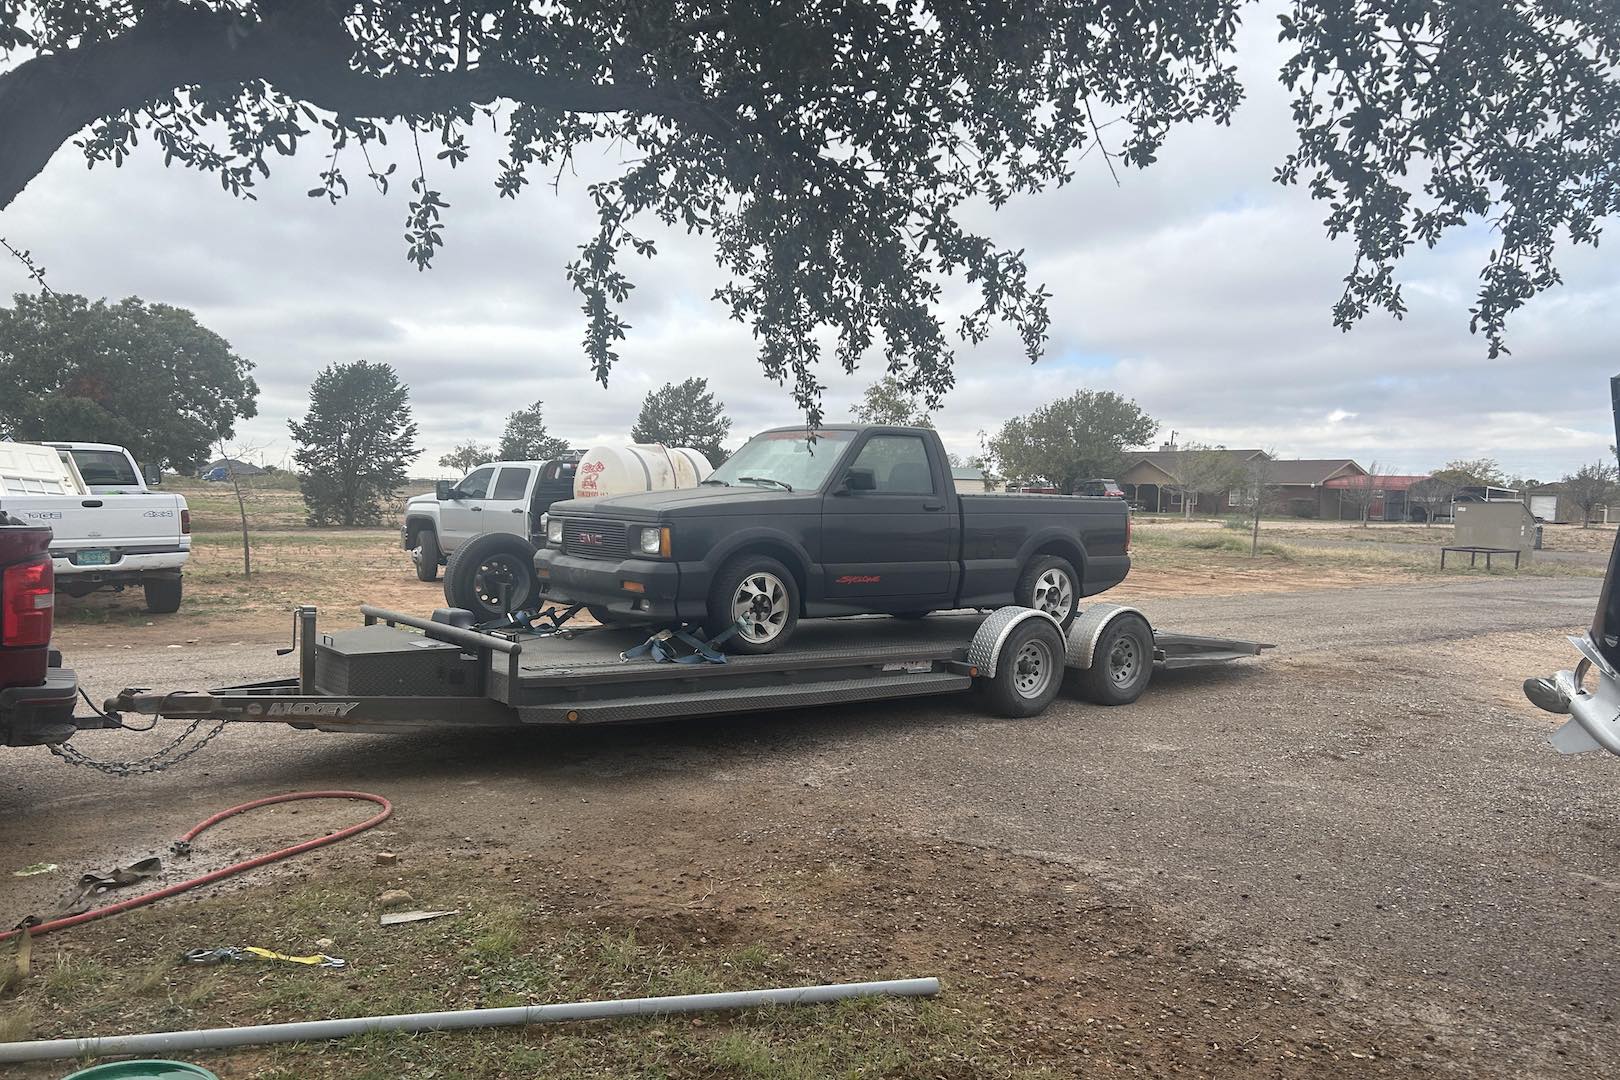 The GMC Syclone reaches its new home on a Texas ranch